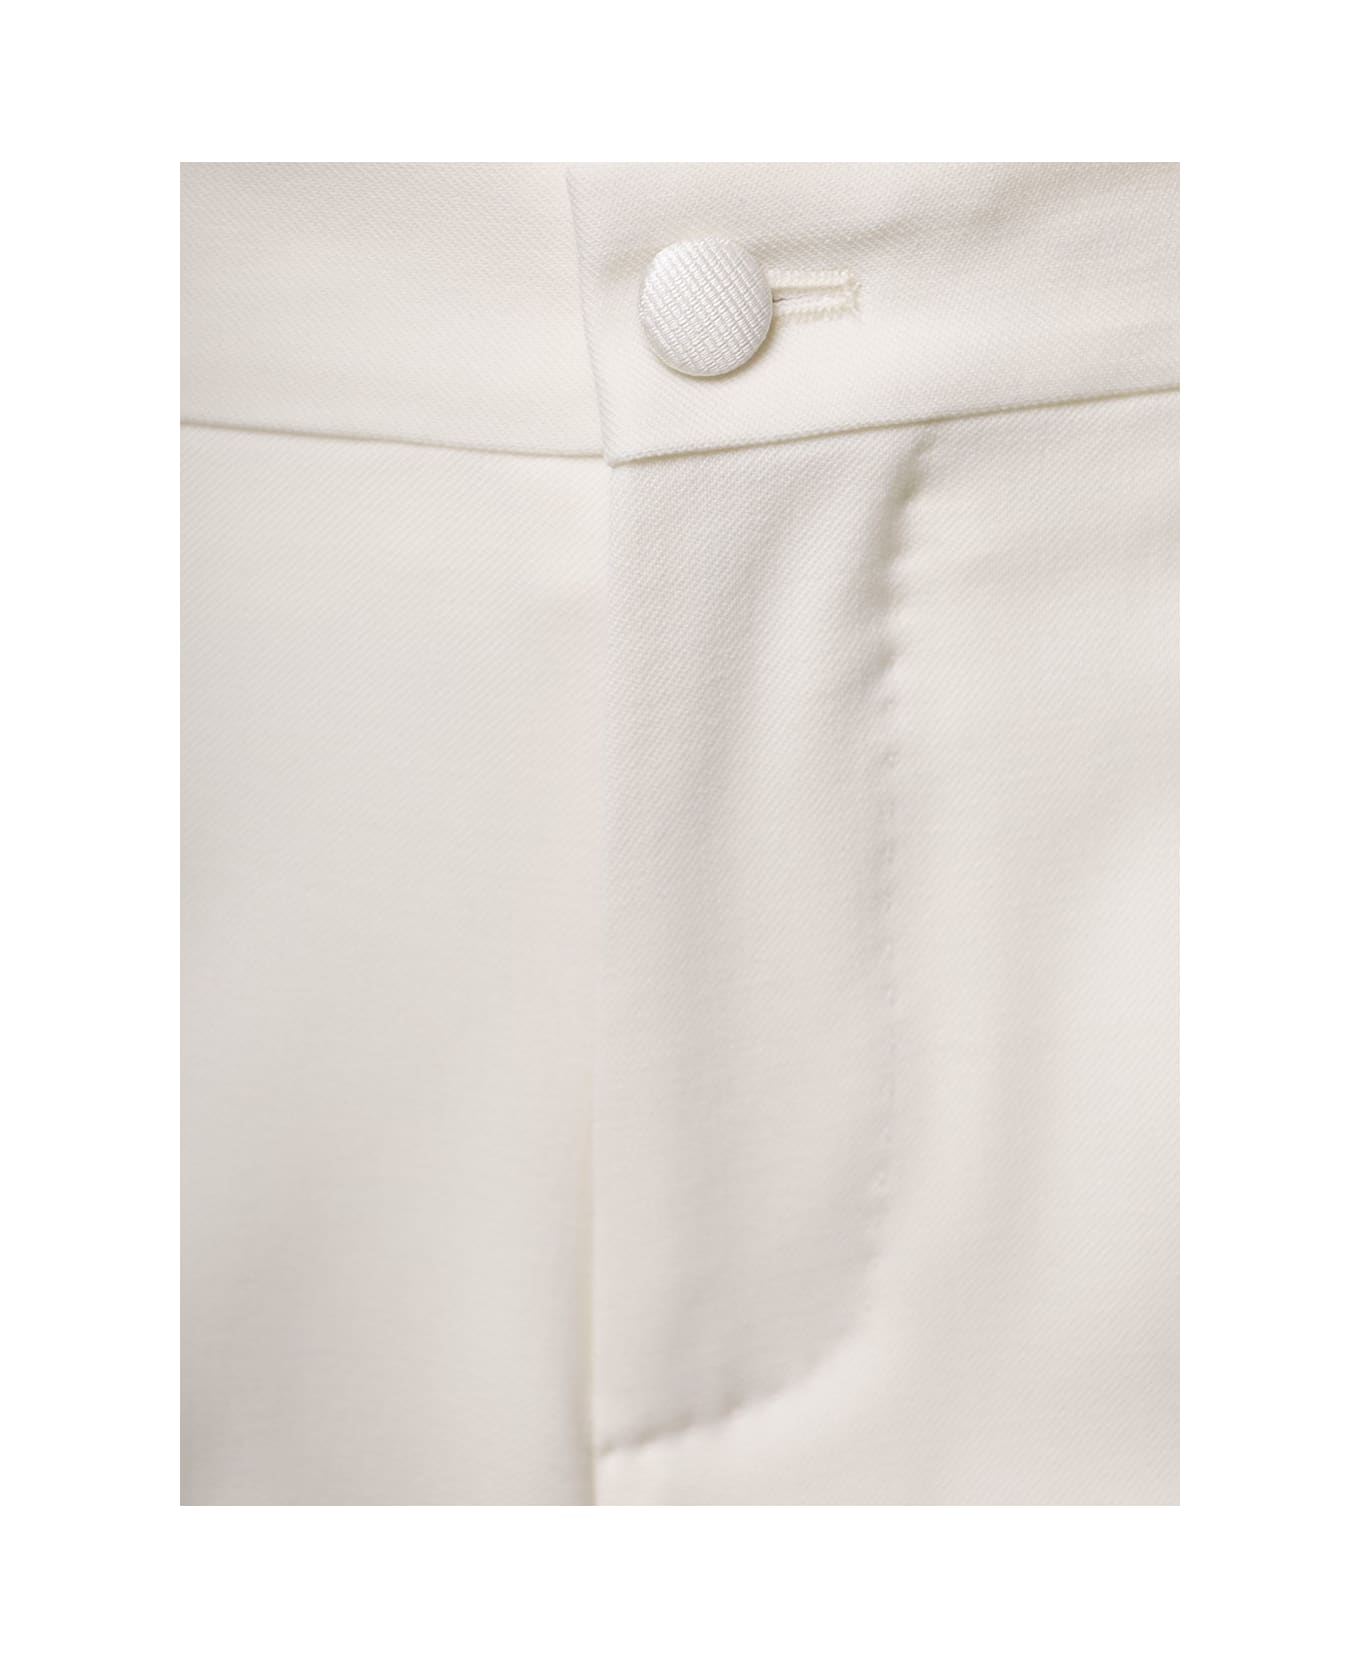 Dolce & Gabbana White Slim Pants With Valletta Button In Wool And Silk Blend Man - White